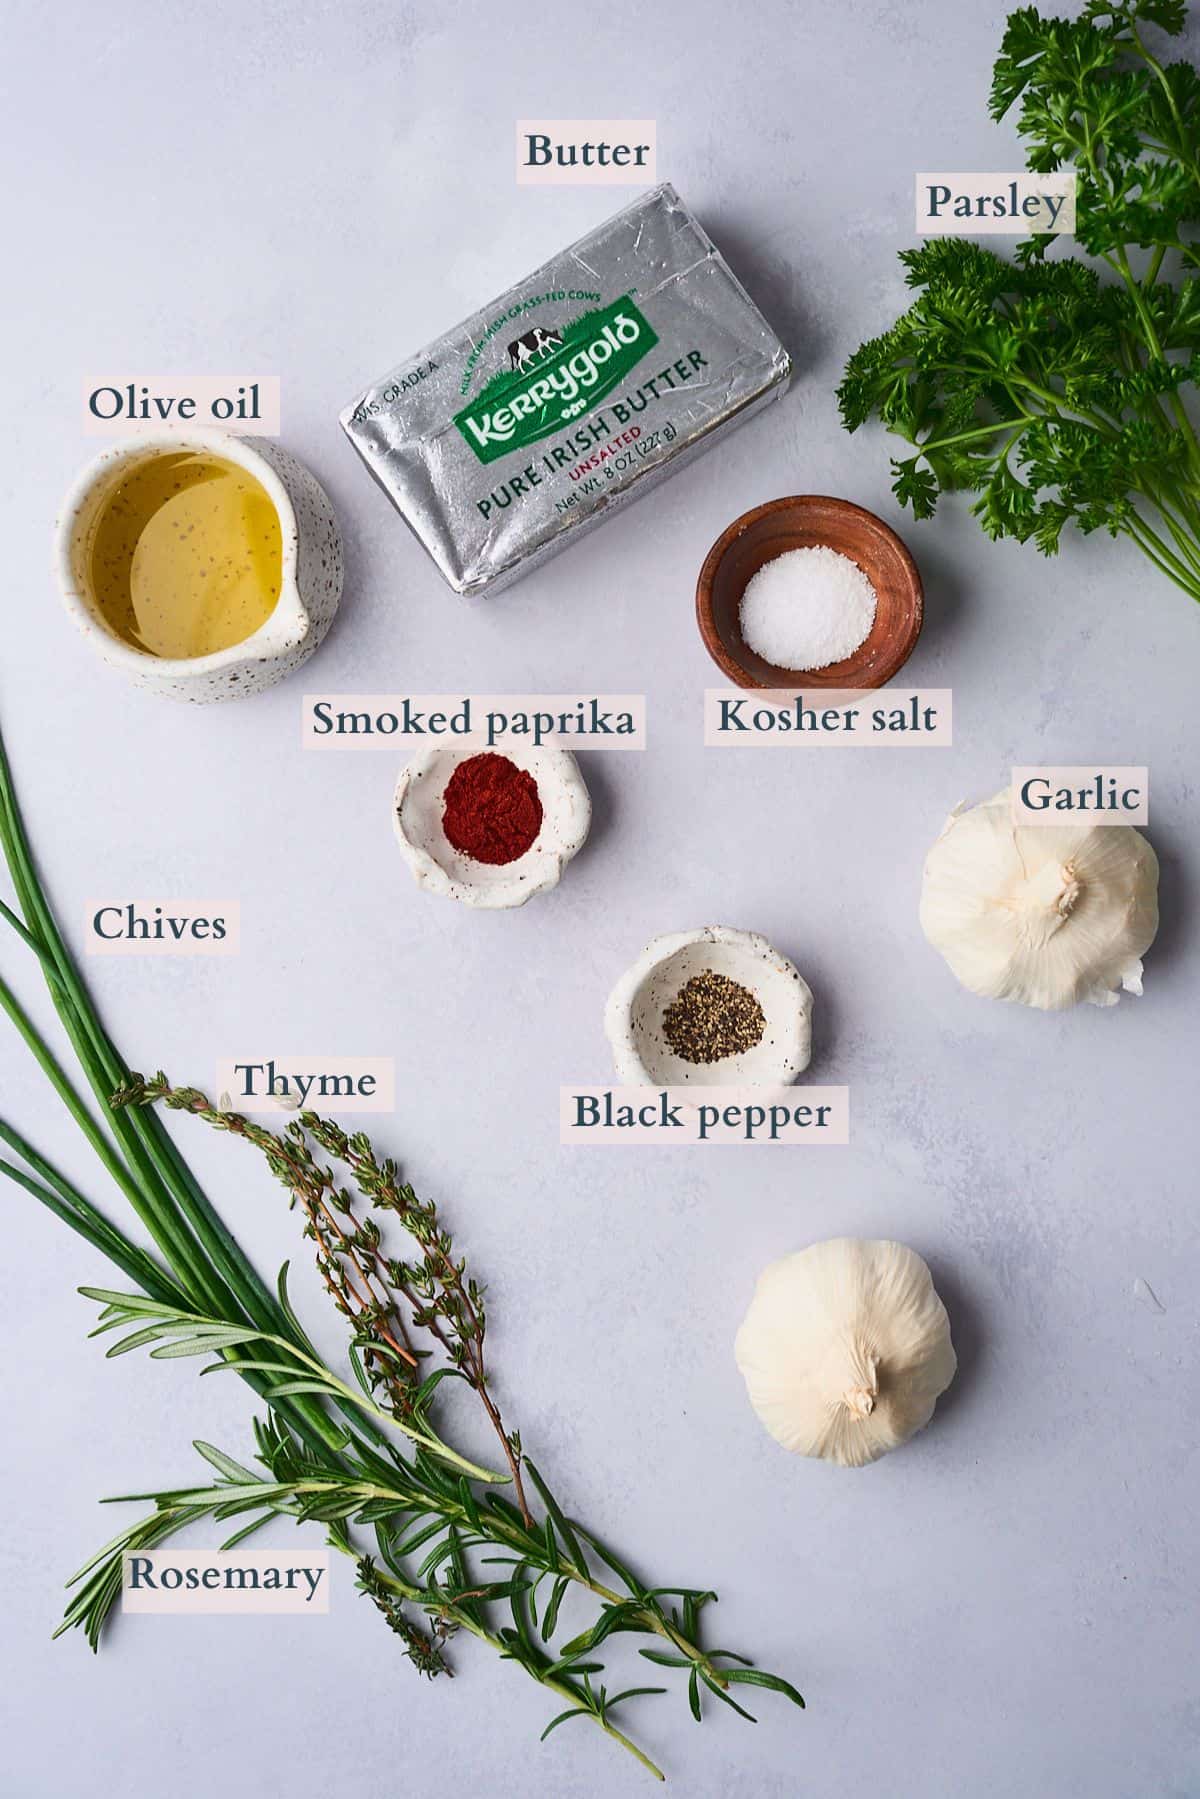 Ingredients to make roasted garlic butter laid out on a table and labeled to denote each ingredient.